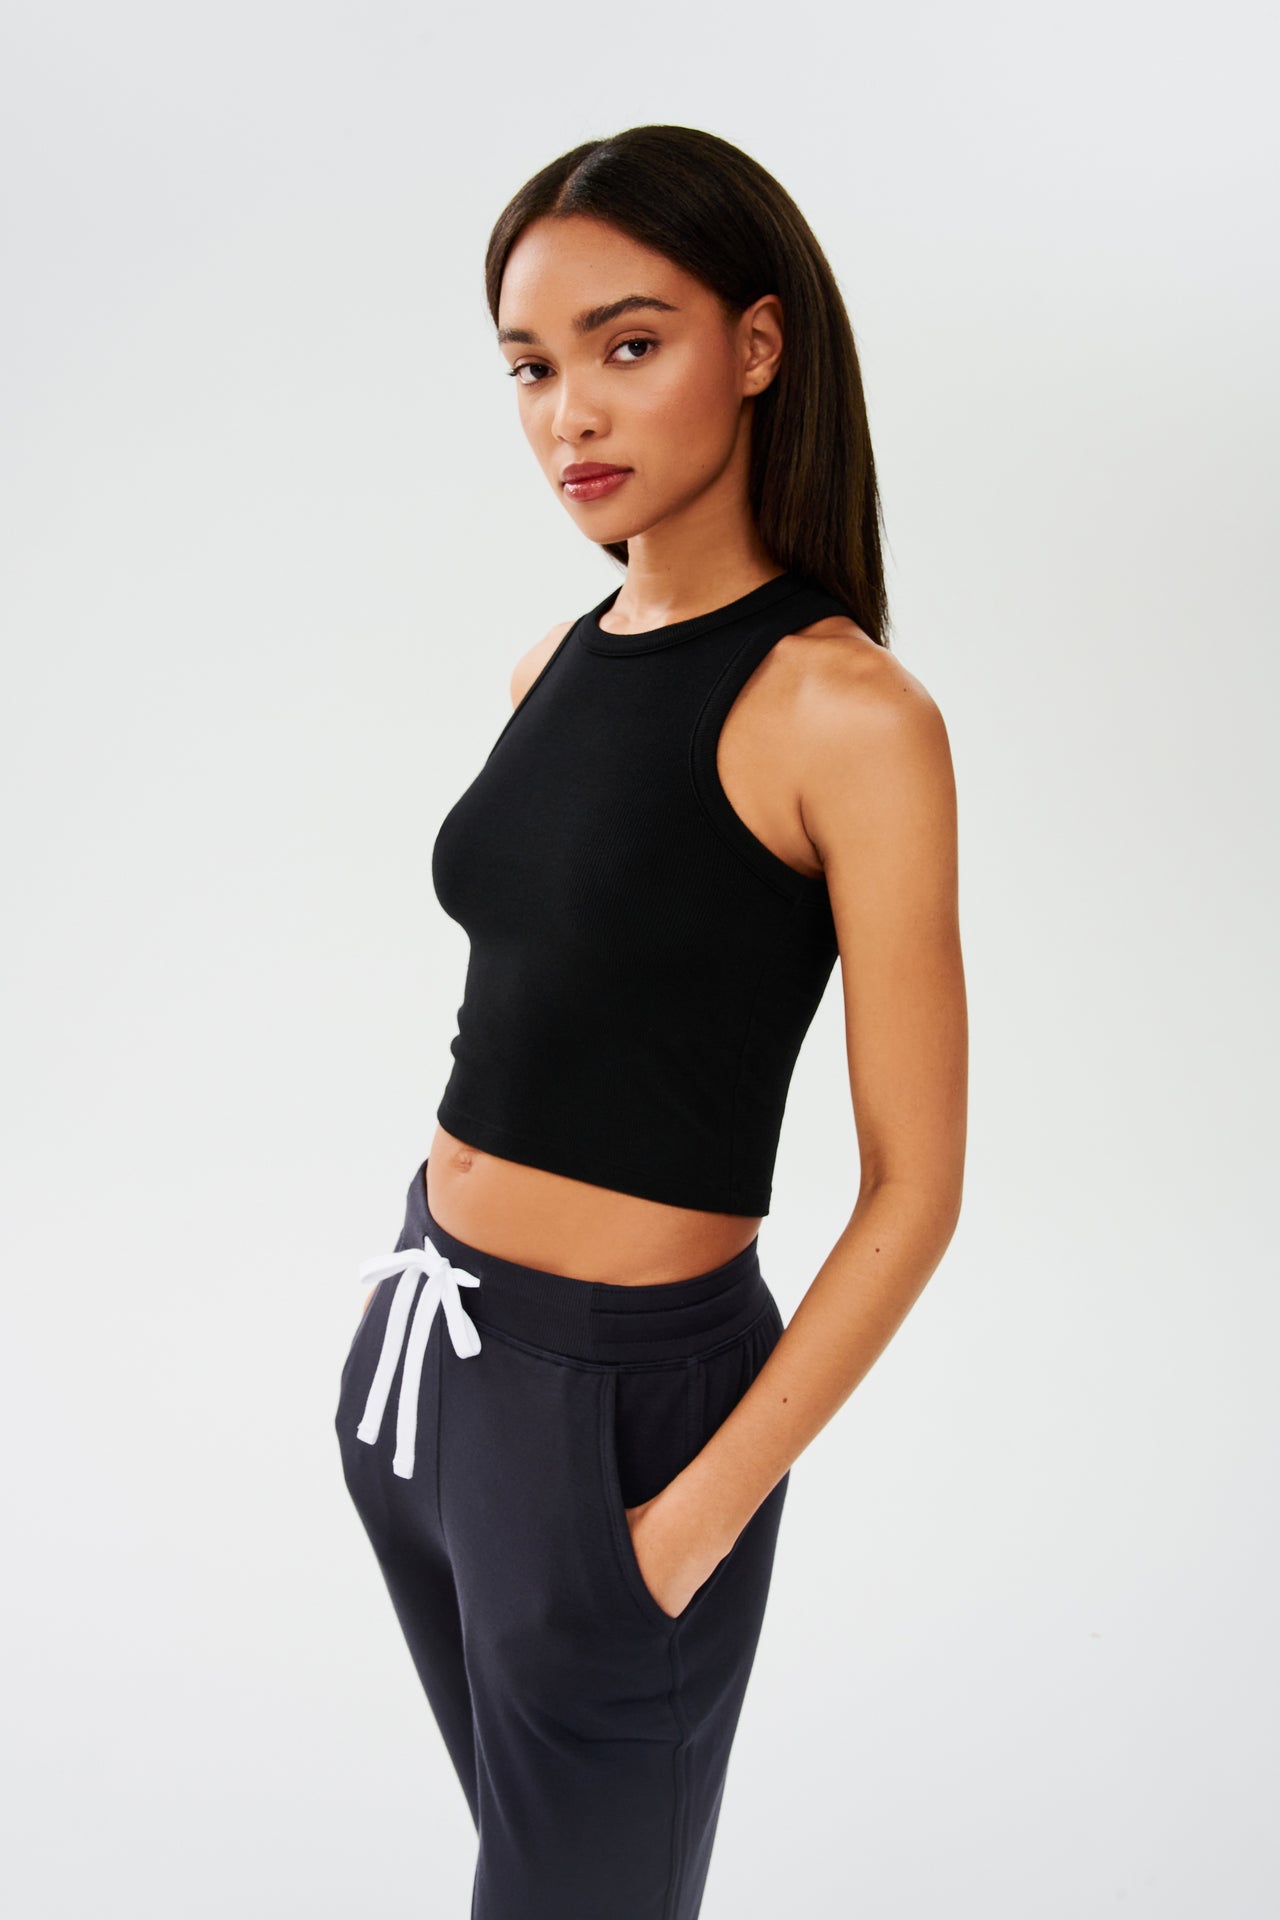 The model is wearing a SPLITS59 Kiki Rib Crop Tank - Black made of soft fabric and black sweatpants, perfect for gym workouts.